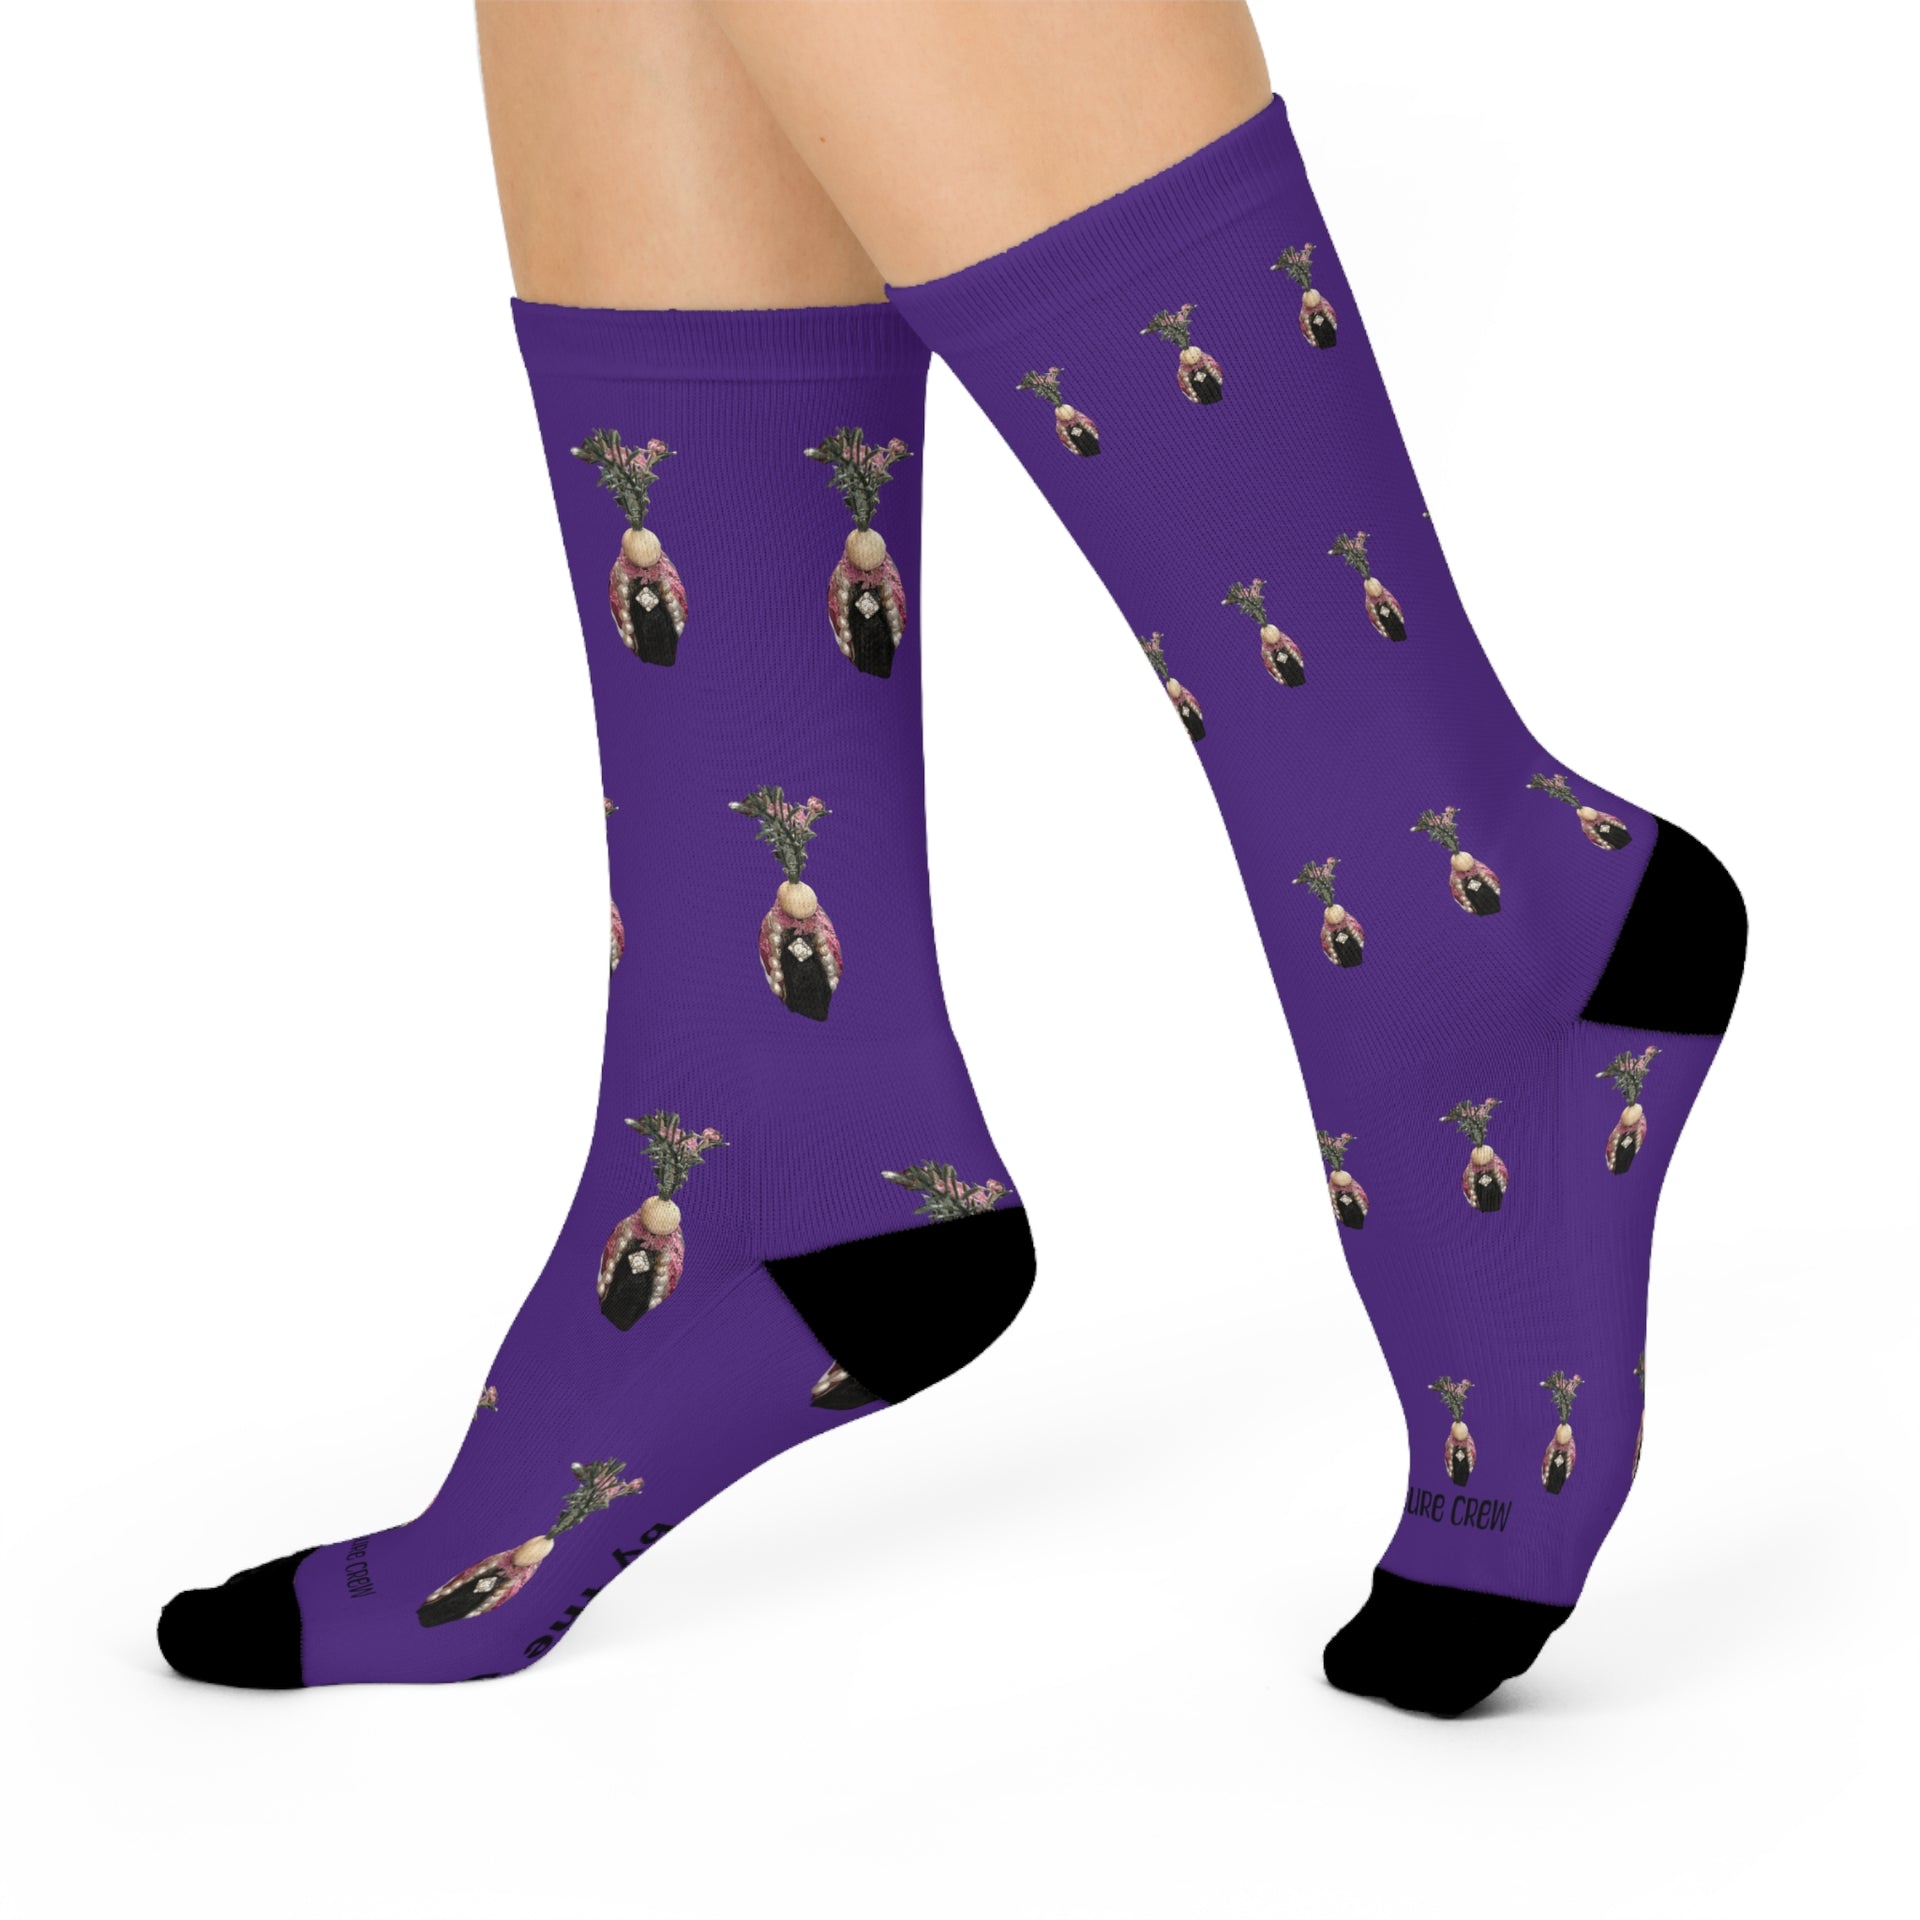 Diamond Isle Queen purple socks, Mix and match for teens and